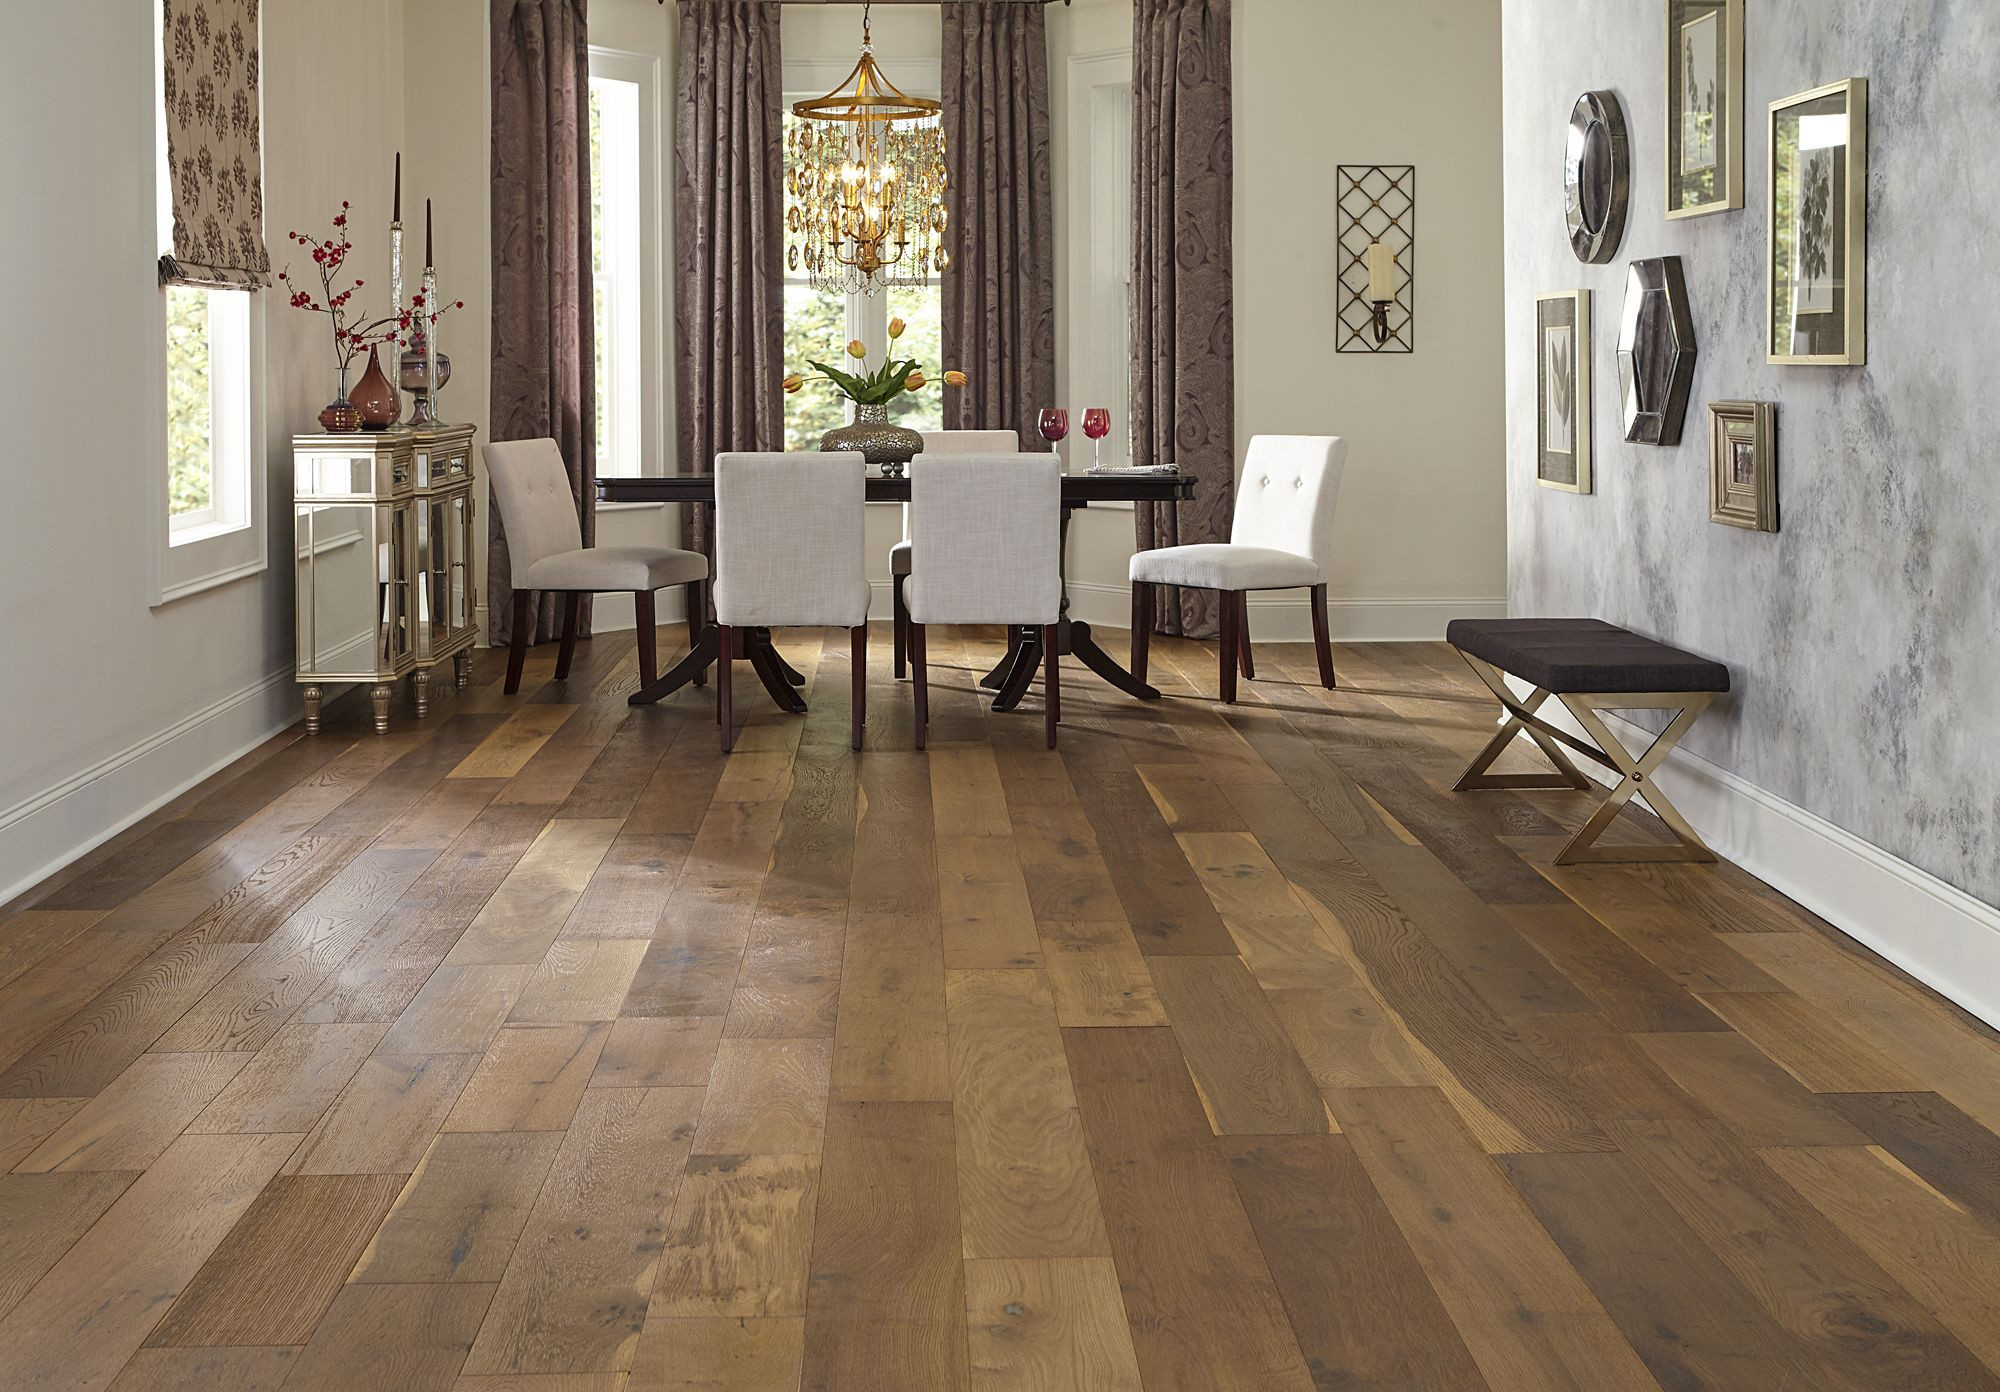 28 Lovely Hand Scraped Hardwood Floors Dallas 2024 free download hand scraped hardwood floors dallas of 7 1 2 wide planks and a rustic look bellawood willow manor oak has pertaining to 7 1 2 wide planks and a rustic look bellawood willow manor oak has a s